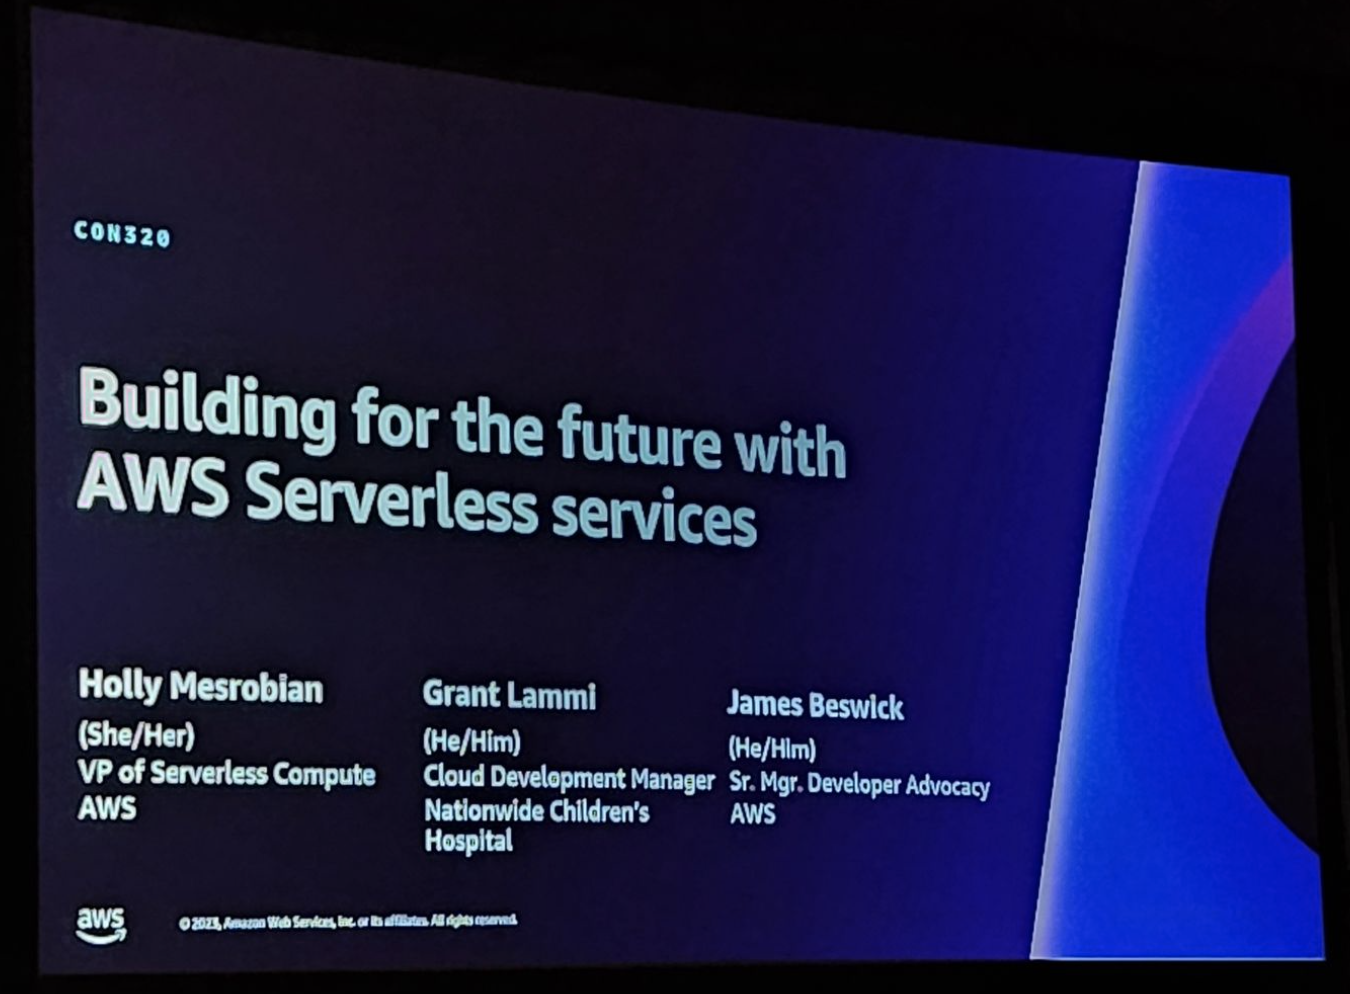 Building for the future with AWS serverless services